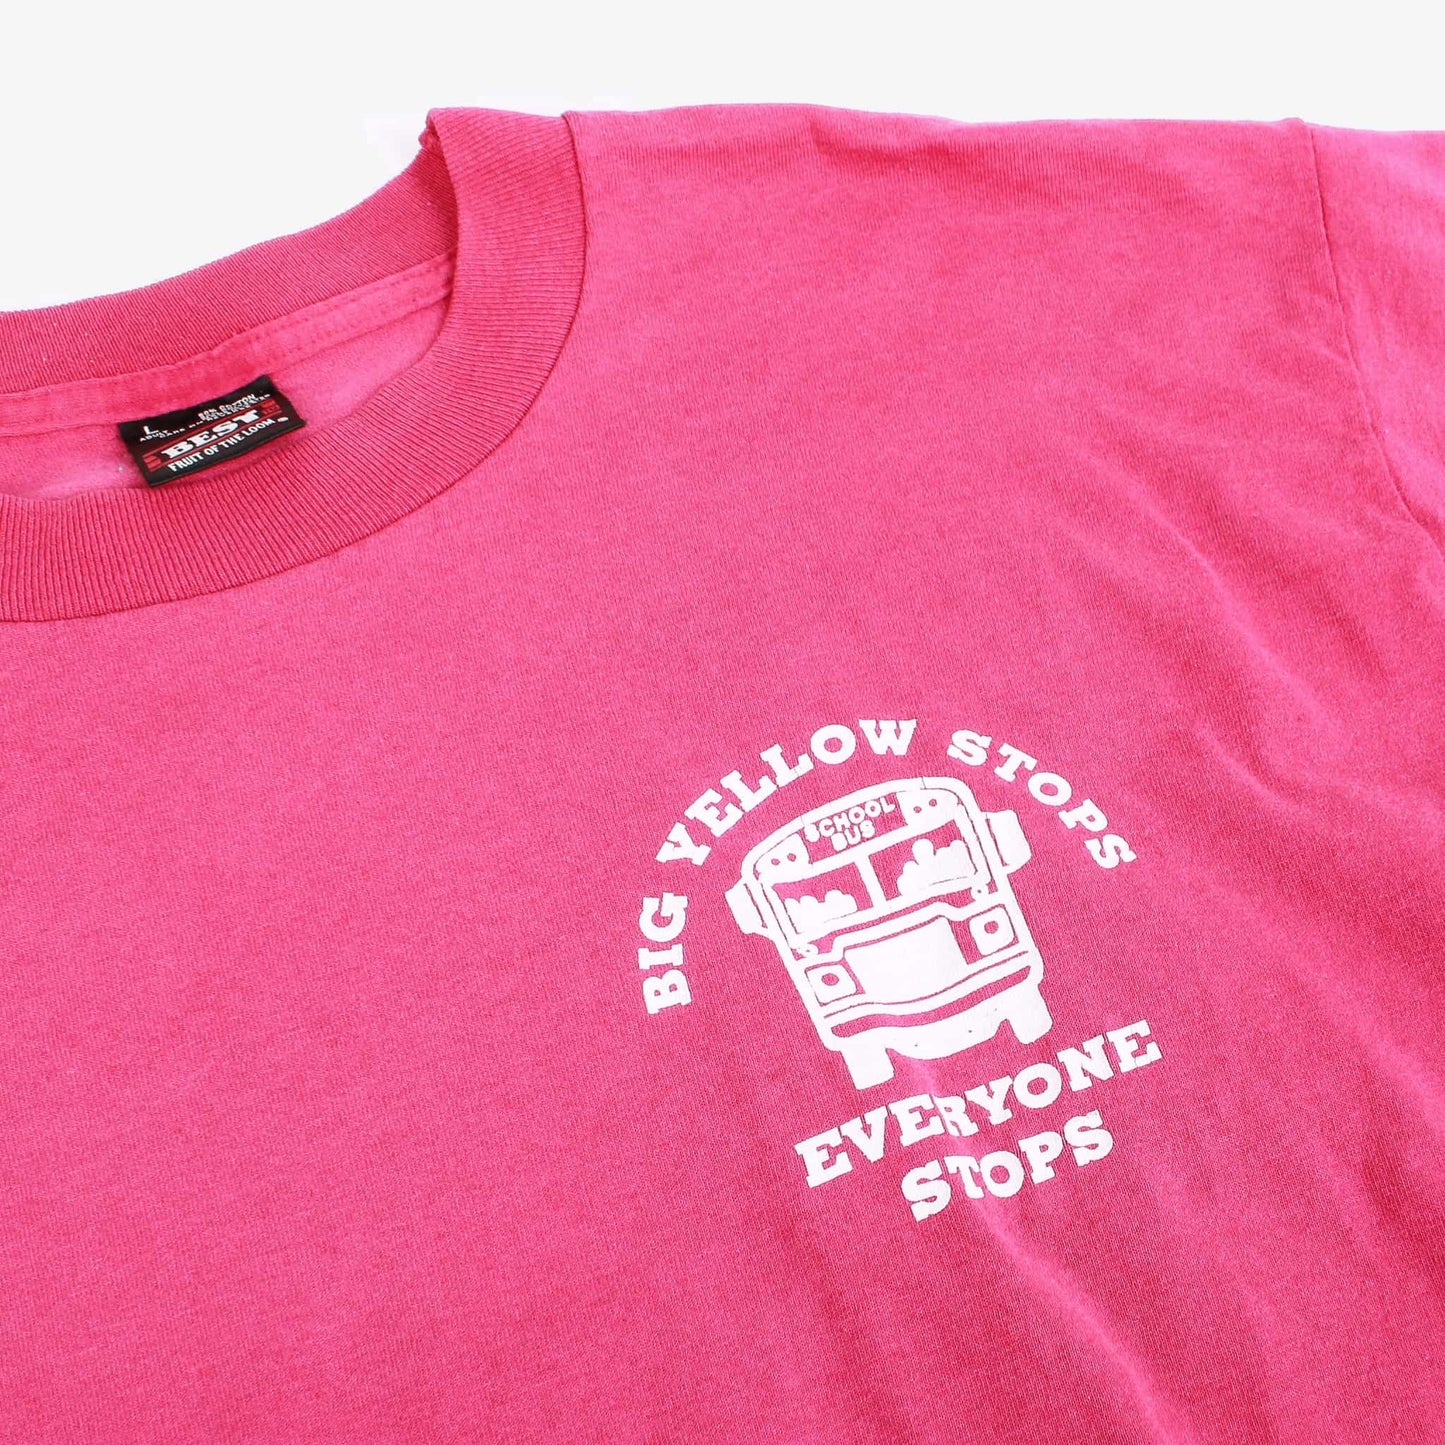 Vintage 'Big Yellow Store' T-Shirt - American Madness